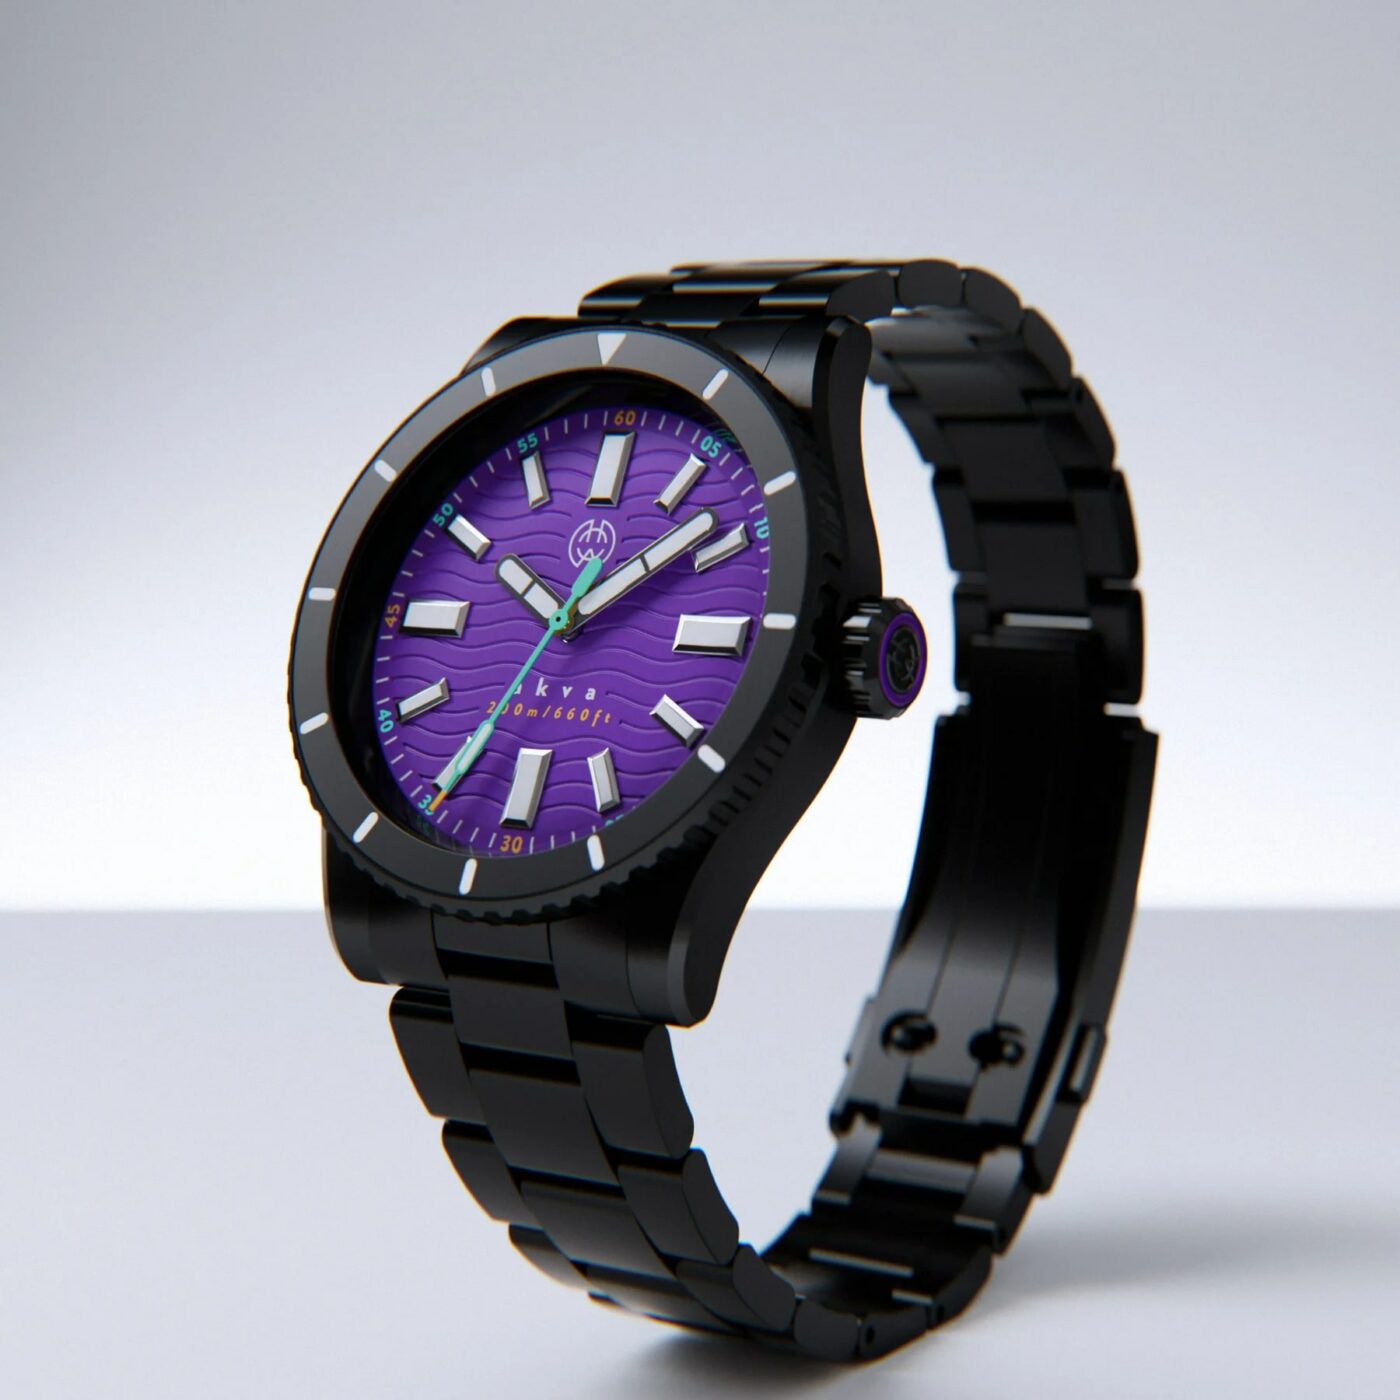 Henry-Archer-watches-akva-spectral-dlc-front